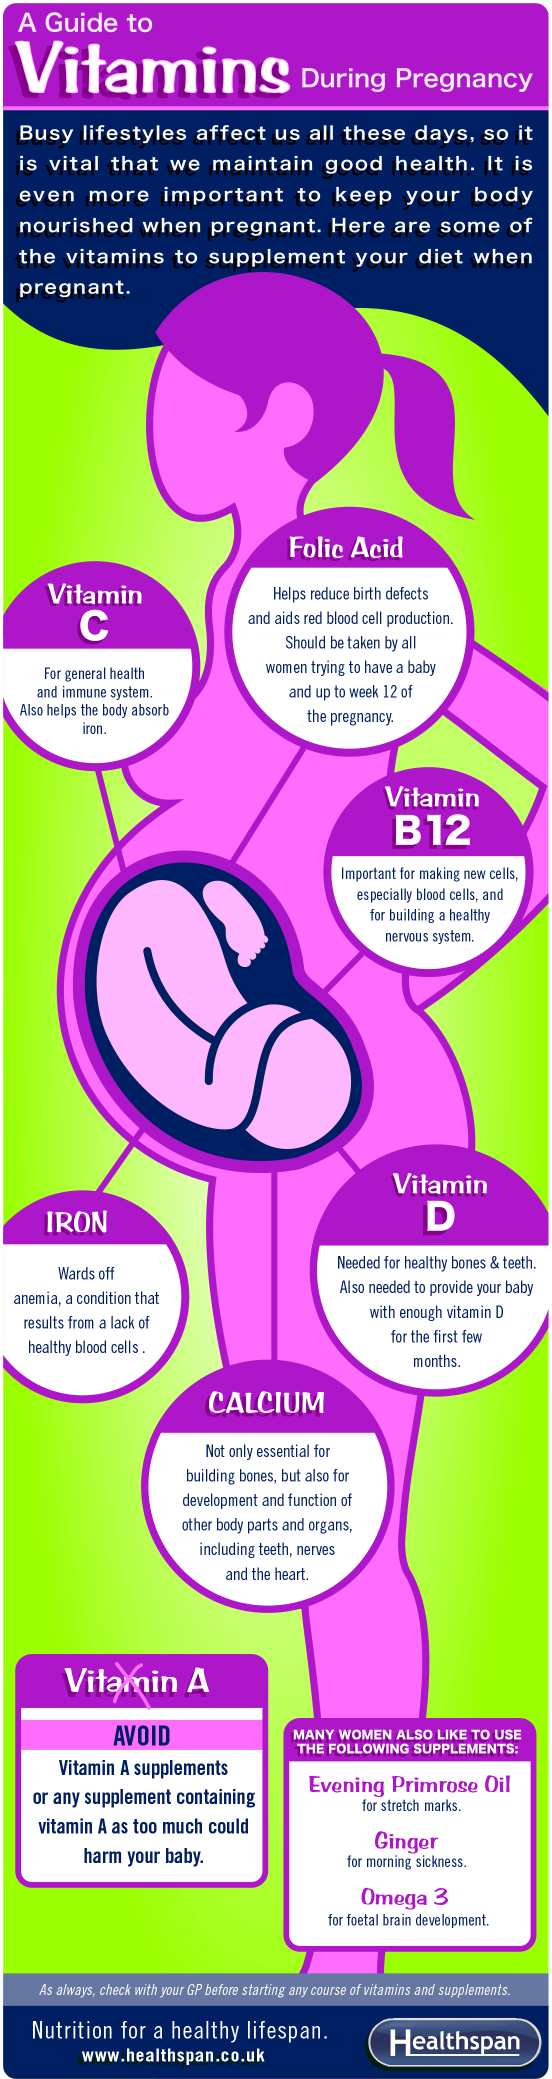 Multivitamins - Guide to vitamins during pregnacy infographic - Healthspan